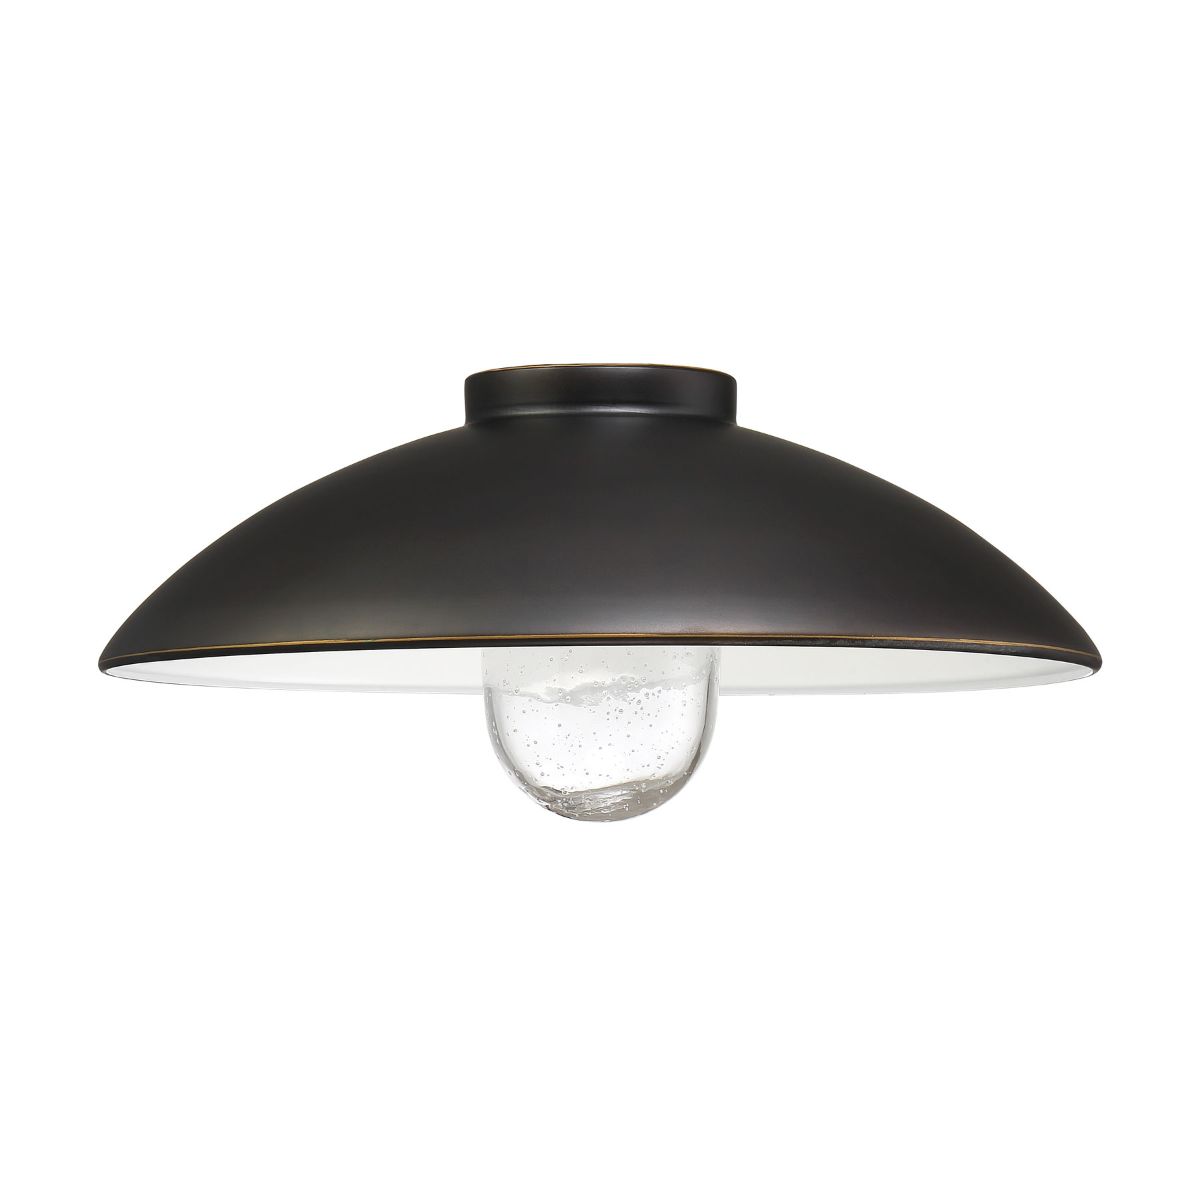 RLM 14 in. Path Light Shade Oil Rubbed Bronze finish - Bees Lighting